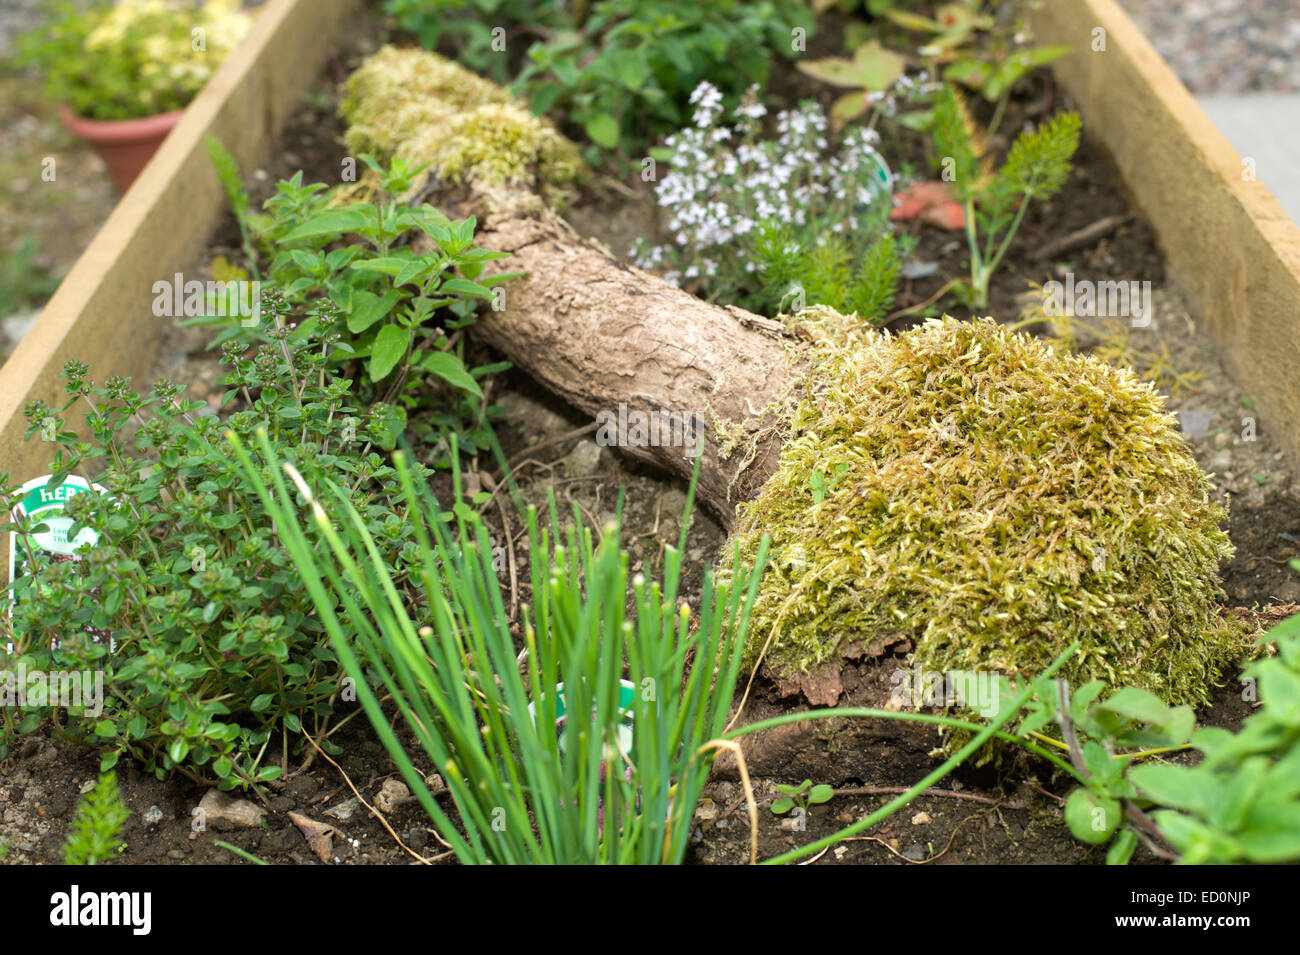 Unusual rustic herb bed in a garden in Scotland containing sage fennel thyme chive around old logs and moss Stock Photo